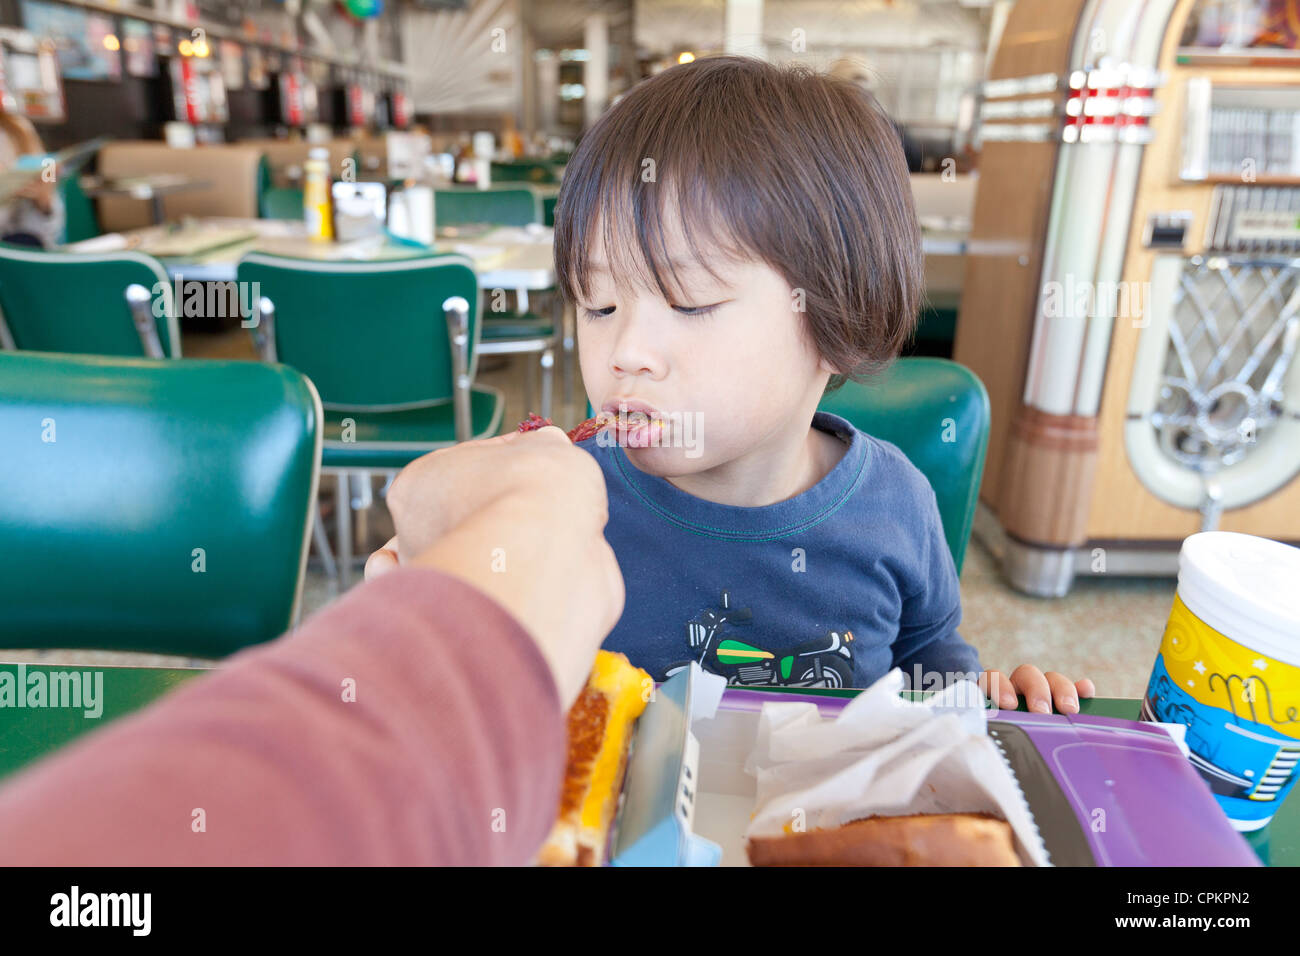 A young Asian boy being fed in a diner Stock Photo